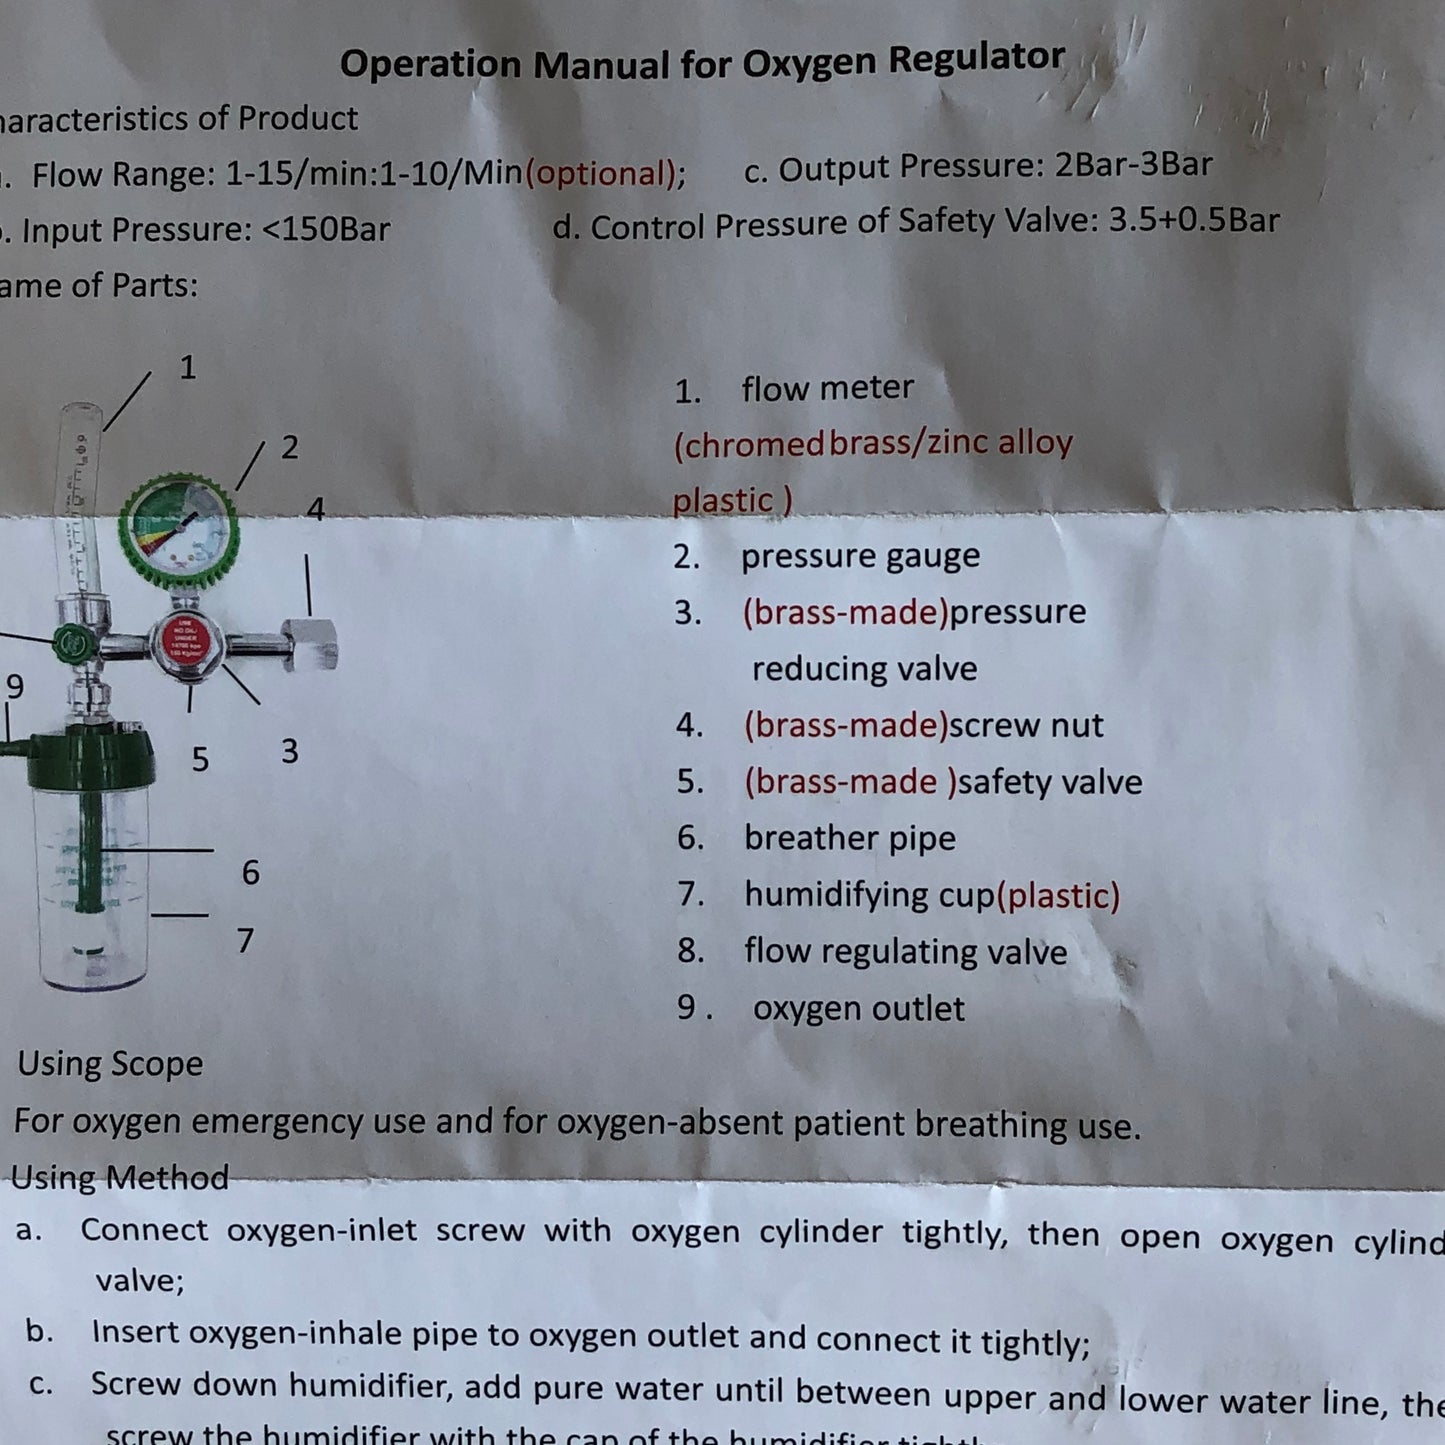 NEW AIRTECH CGA540 OXYGEN REGULATOR WITH FLOW CONTROL 0-10MLPM SHIPS FREE